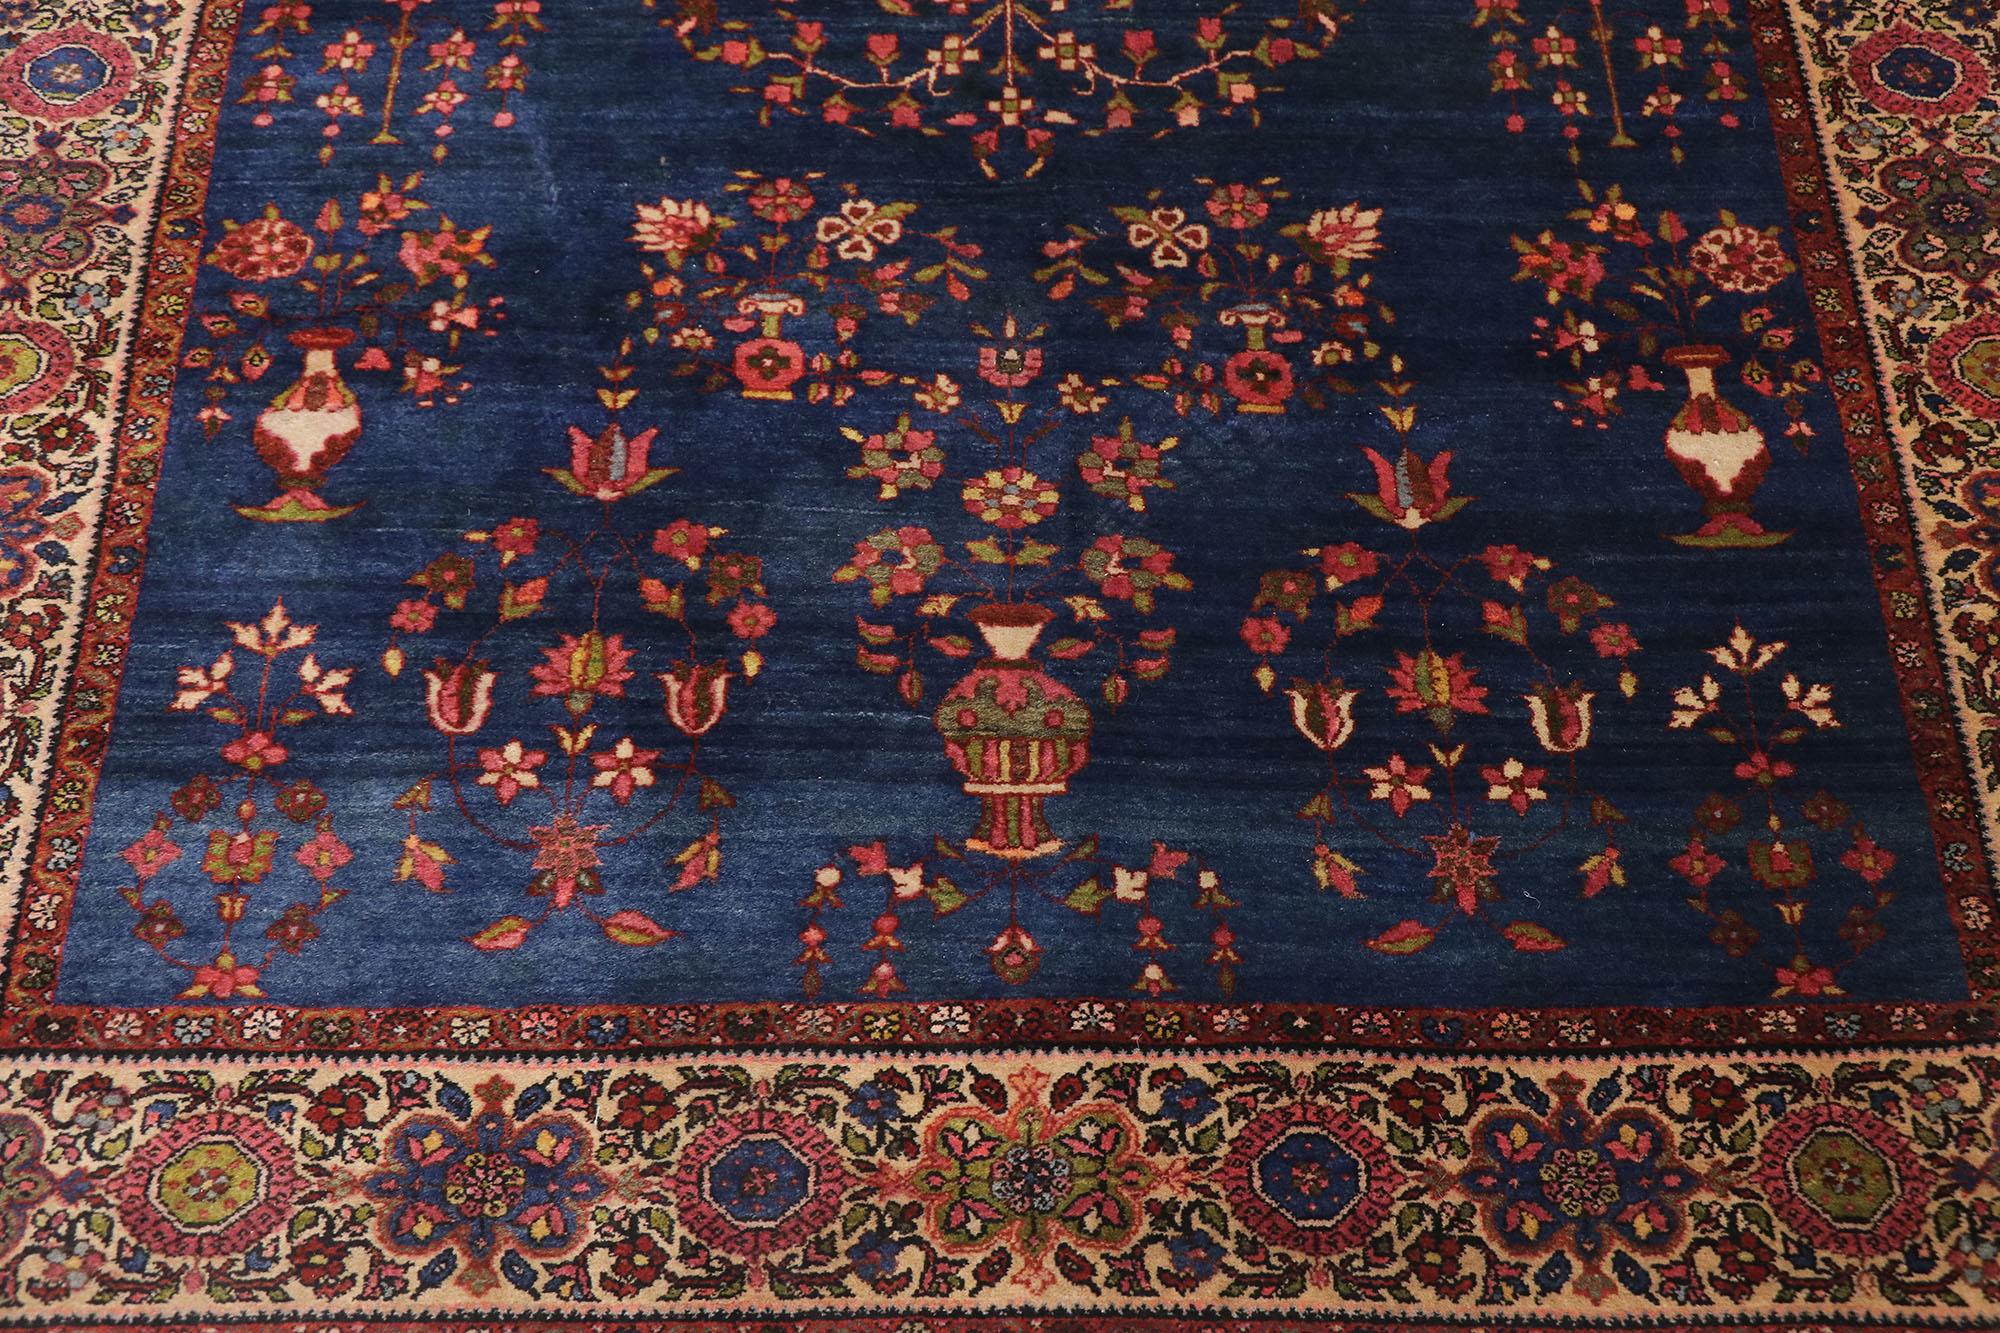 Antique Persian Sarouk Farahan Rug with Victorian Style In Good Condition For Sale In Dallas, TX